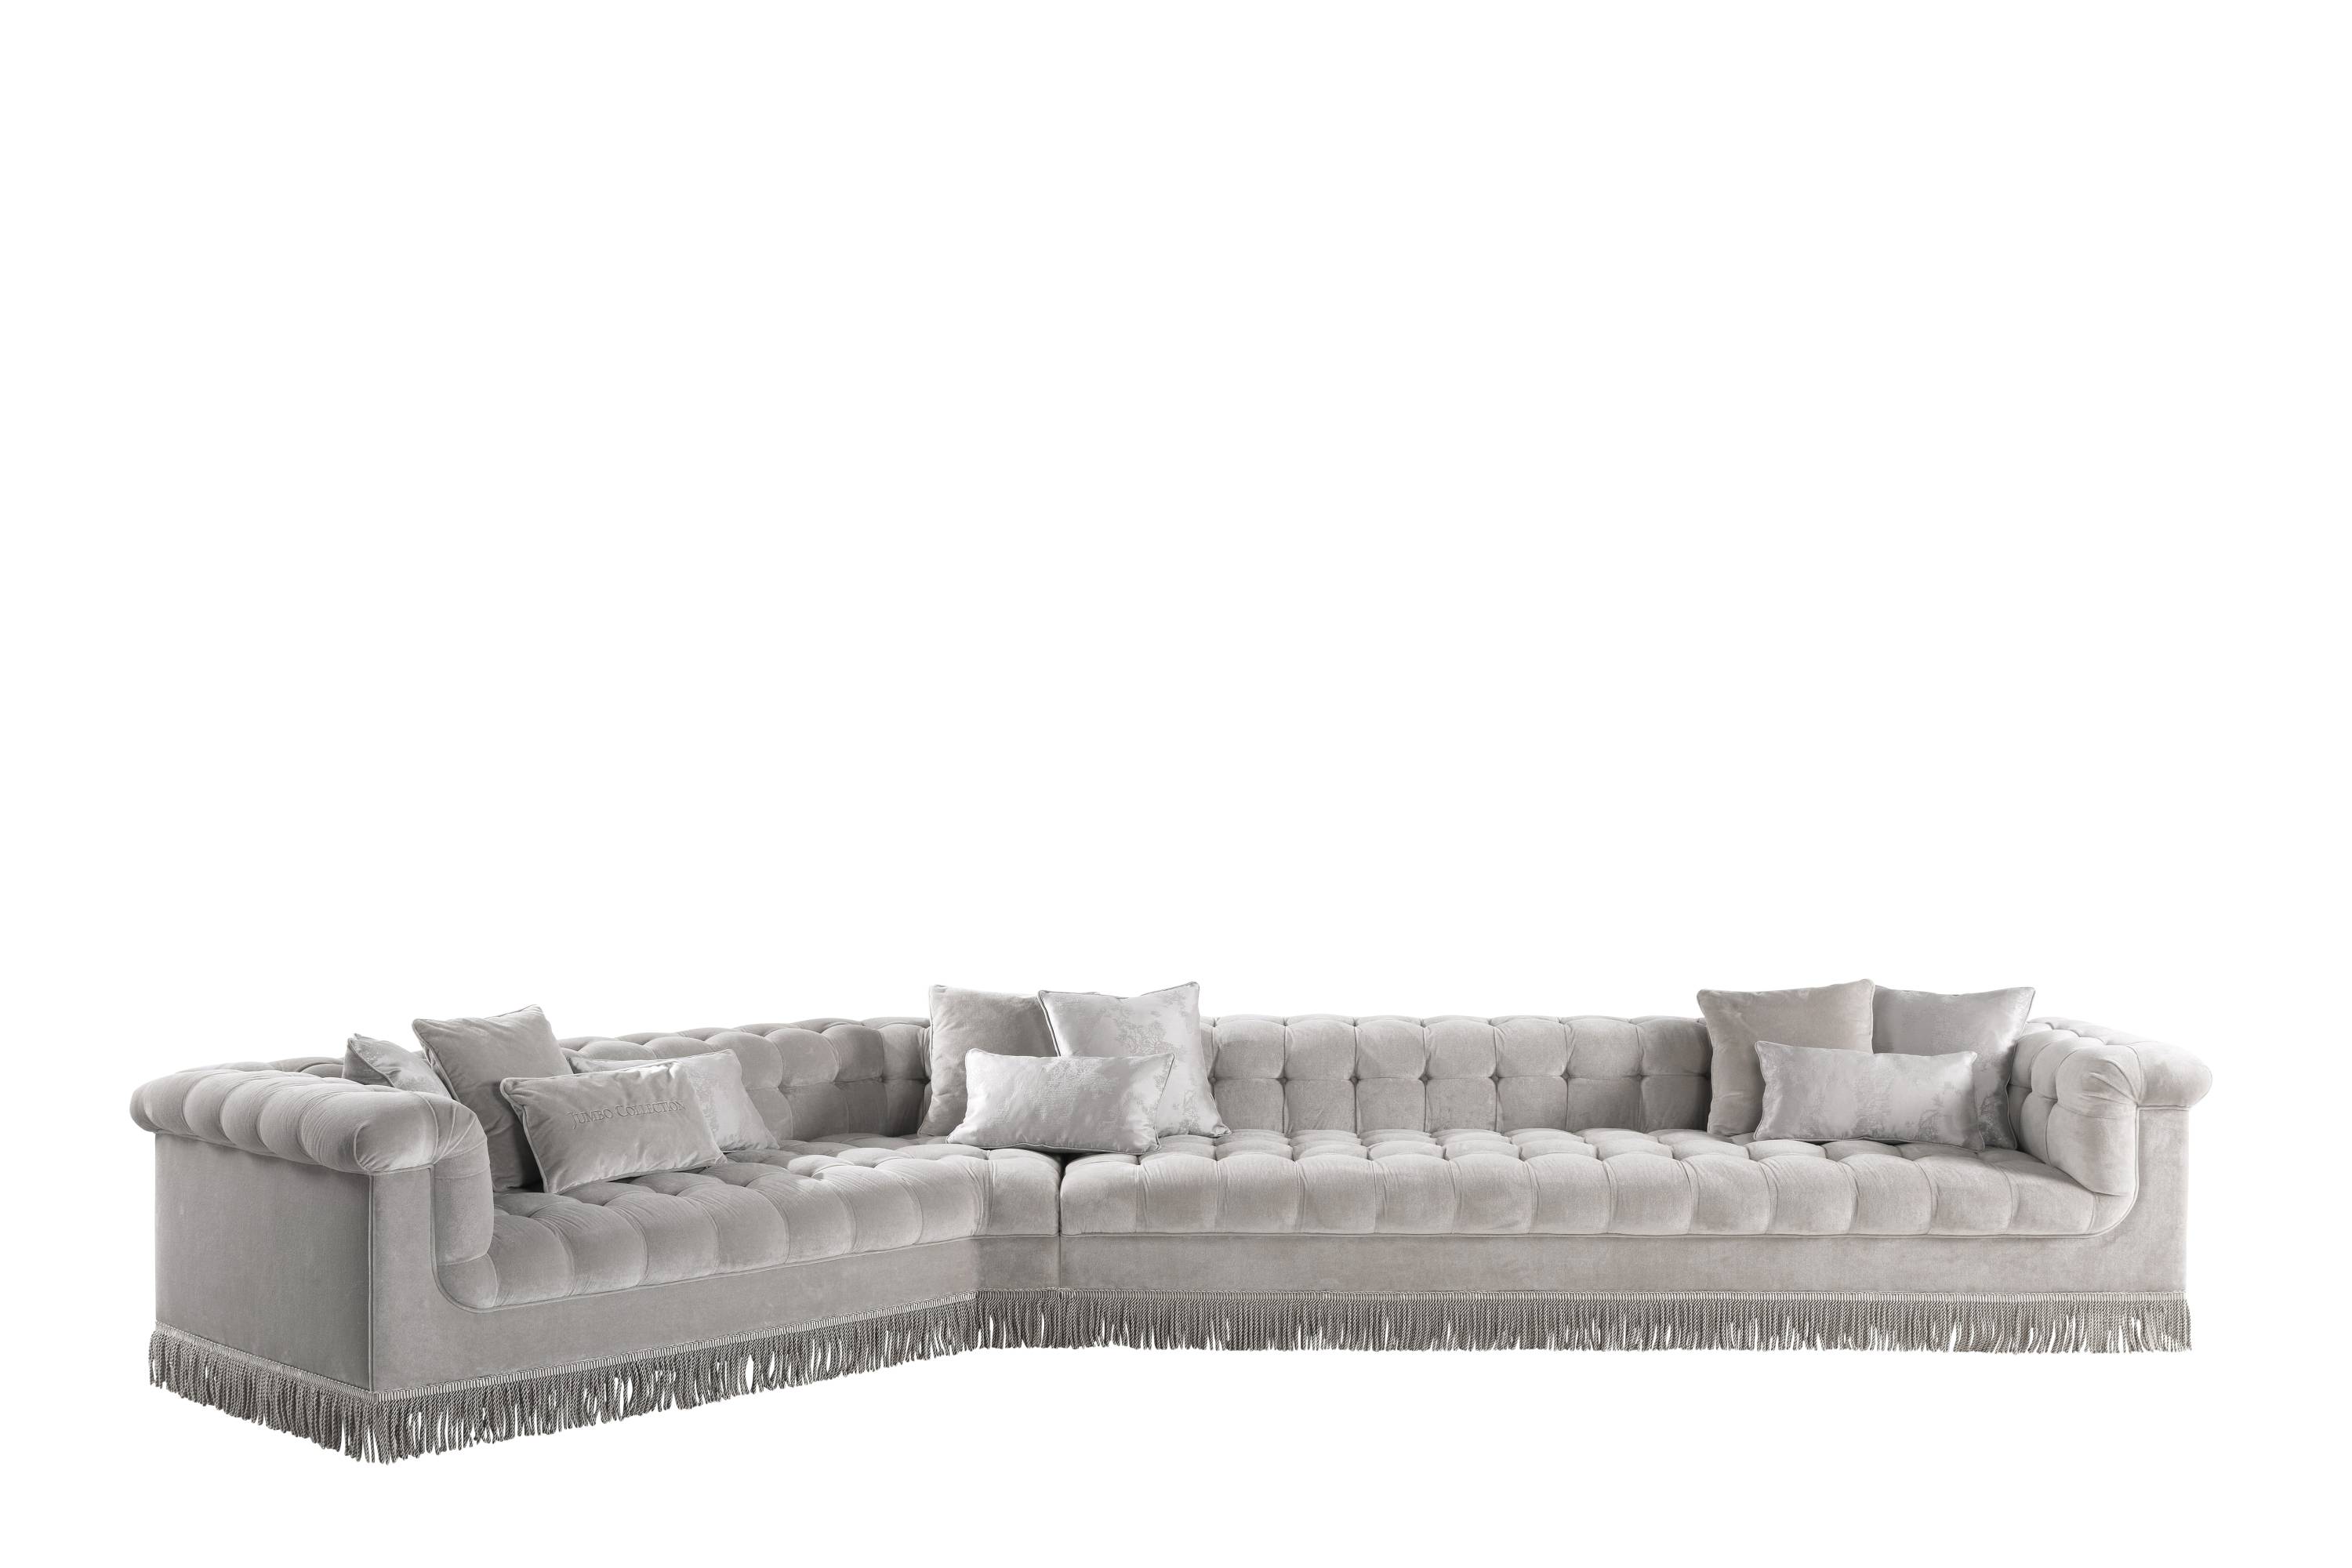 GRAND ARMÉE 2-seater sofa - 3-seater sofa - armchair - sofa - Discover the elegance of luxury Héritage collection by Jumbo collection